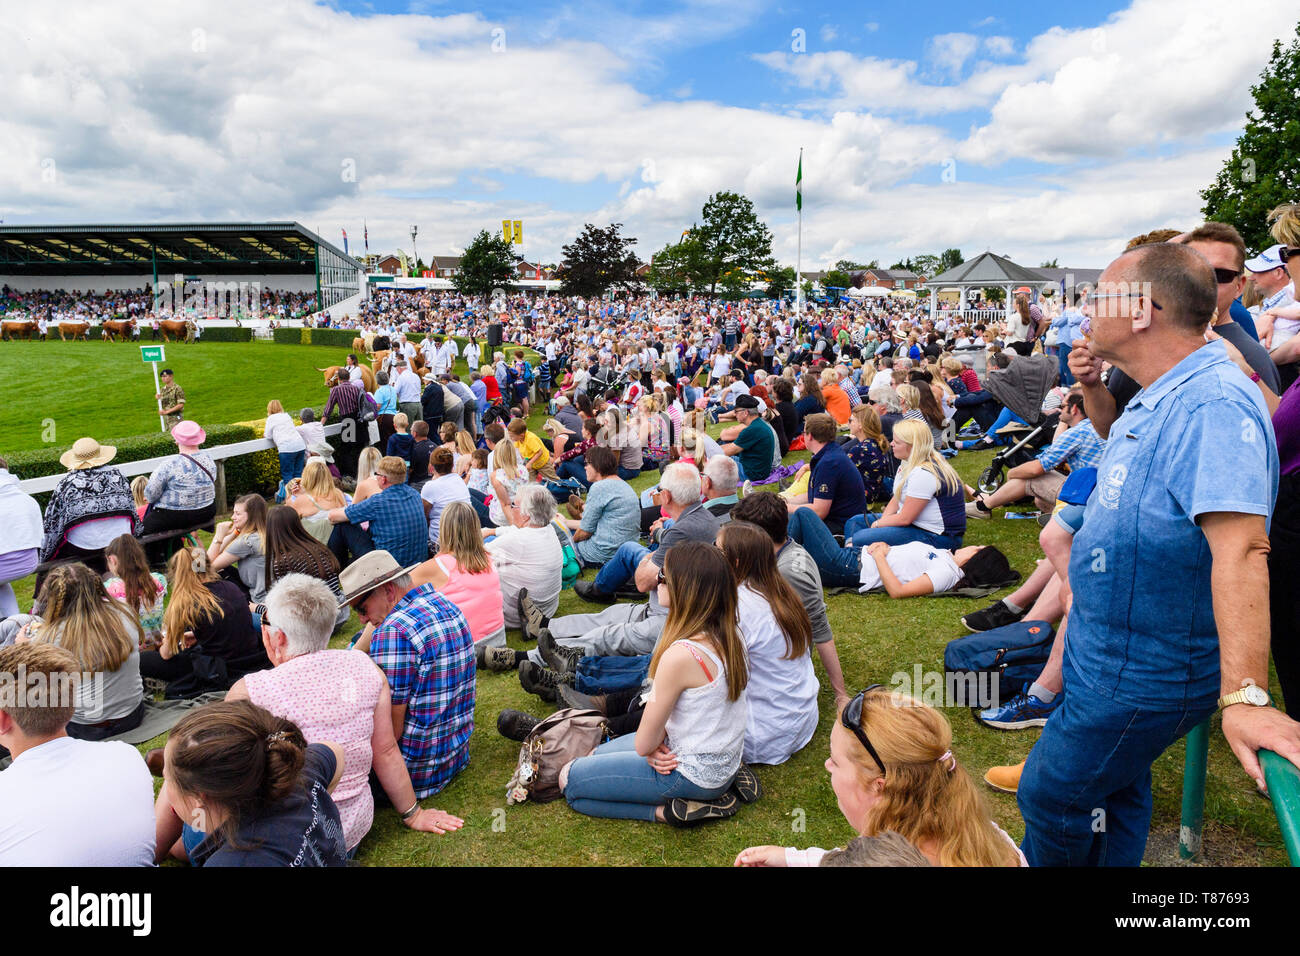 Big crowd of people sitting by main arena in sun, watch Grand cattle parade (livestock & handlers) - The Great Yorkshire Show, Harrogate, England, UK. Stock Photo